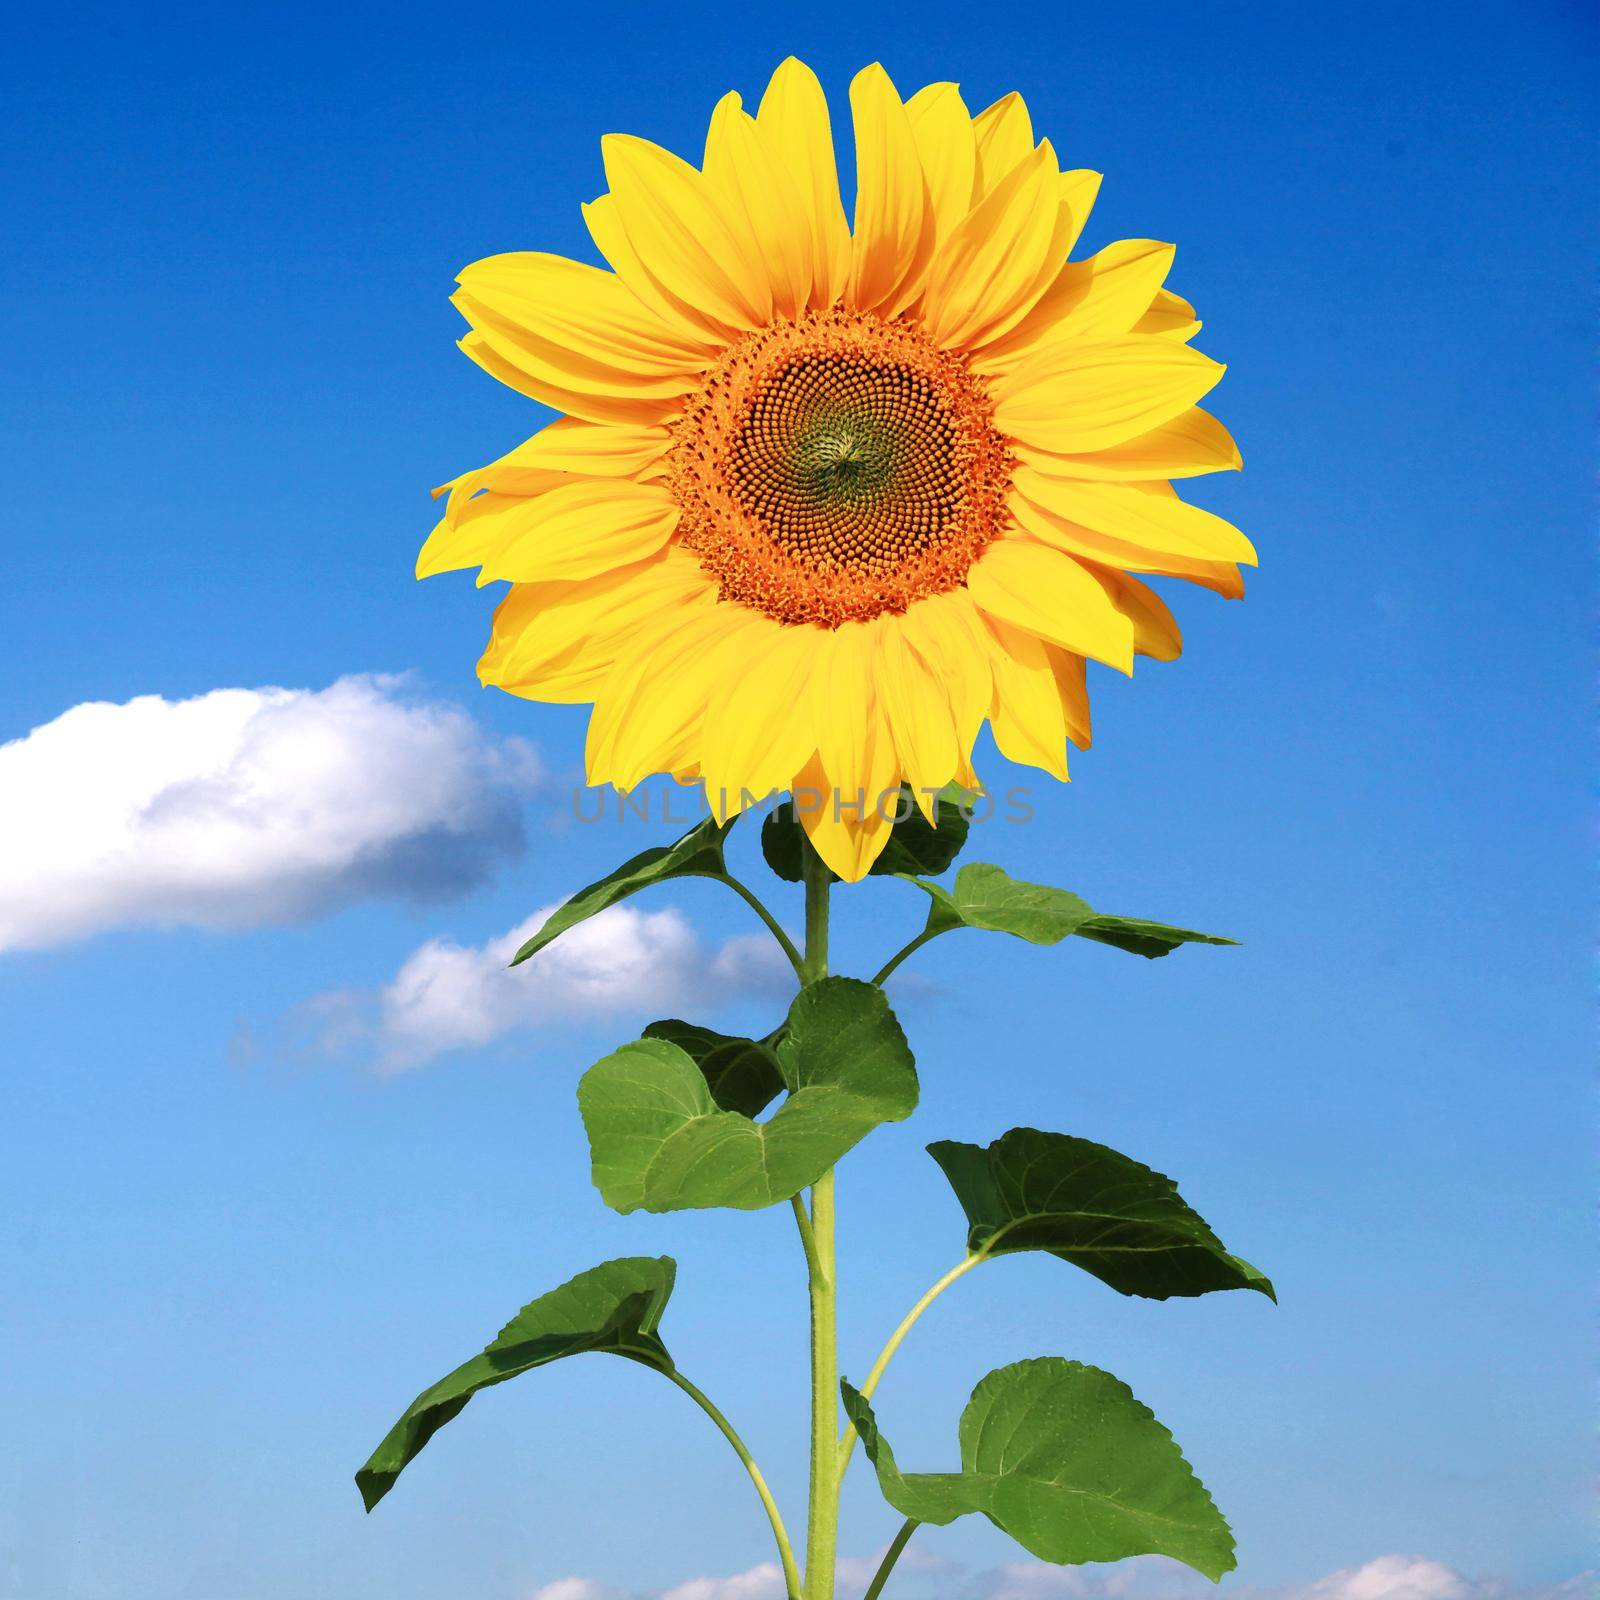 Close-up of fresh sunflower against clear blue sky